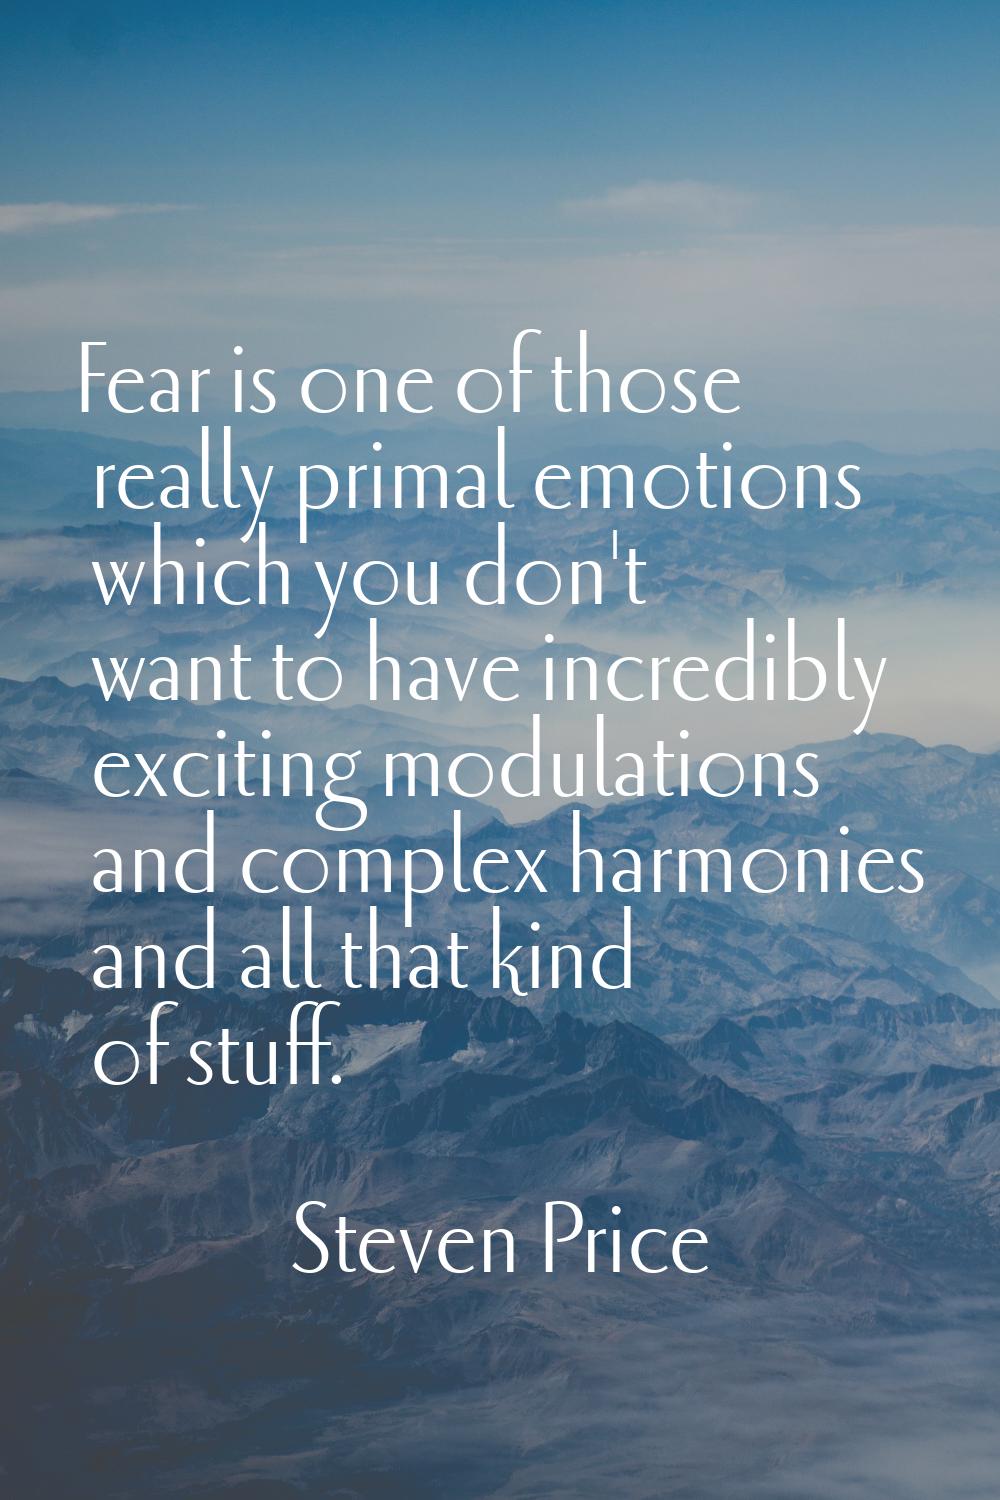 Fear is one of those really primal emotions which you don't want to have incredibly exciting modula